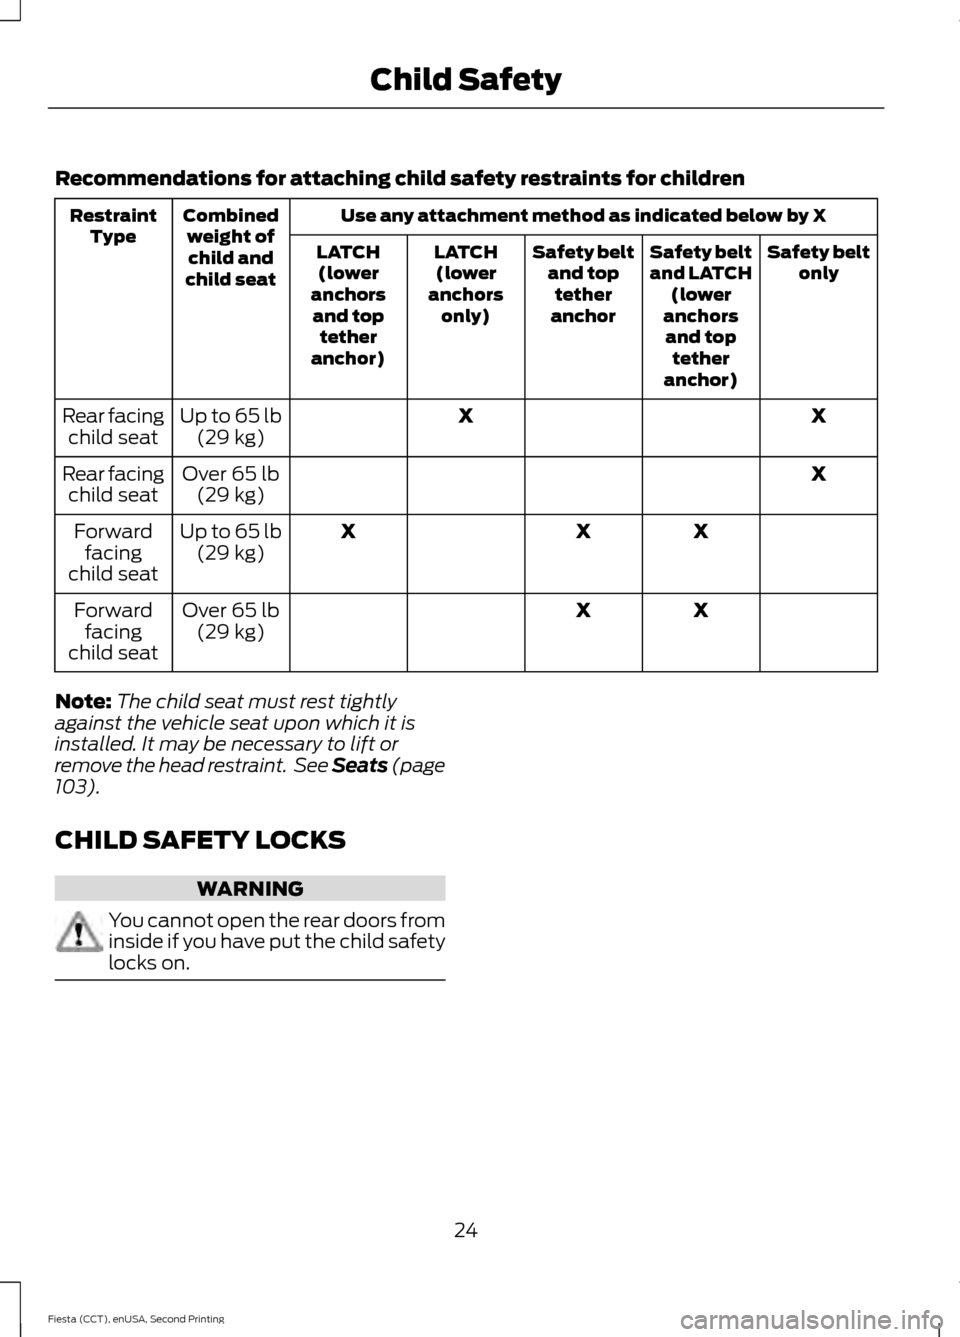 FORD FIESTA 2015 6.G User Guide Recommendations for attaching child safety restraints for children
Use any attachment method as indicated below by X
Combined
weight ofchild and
child seat
Restraint
Type Safety belt
only
Safety belt
